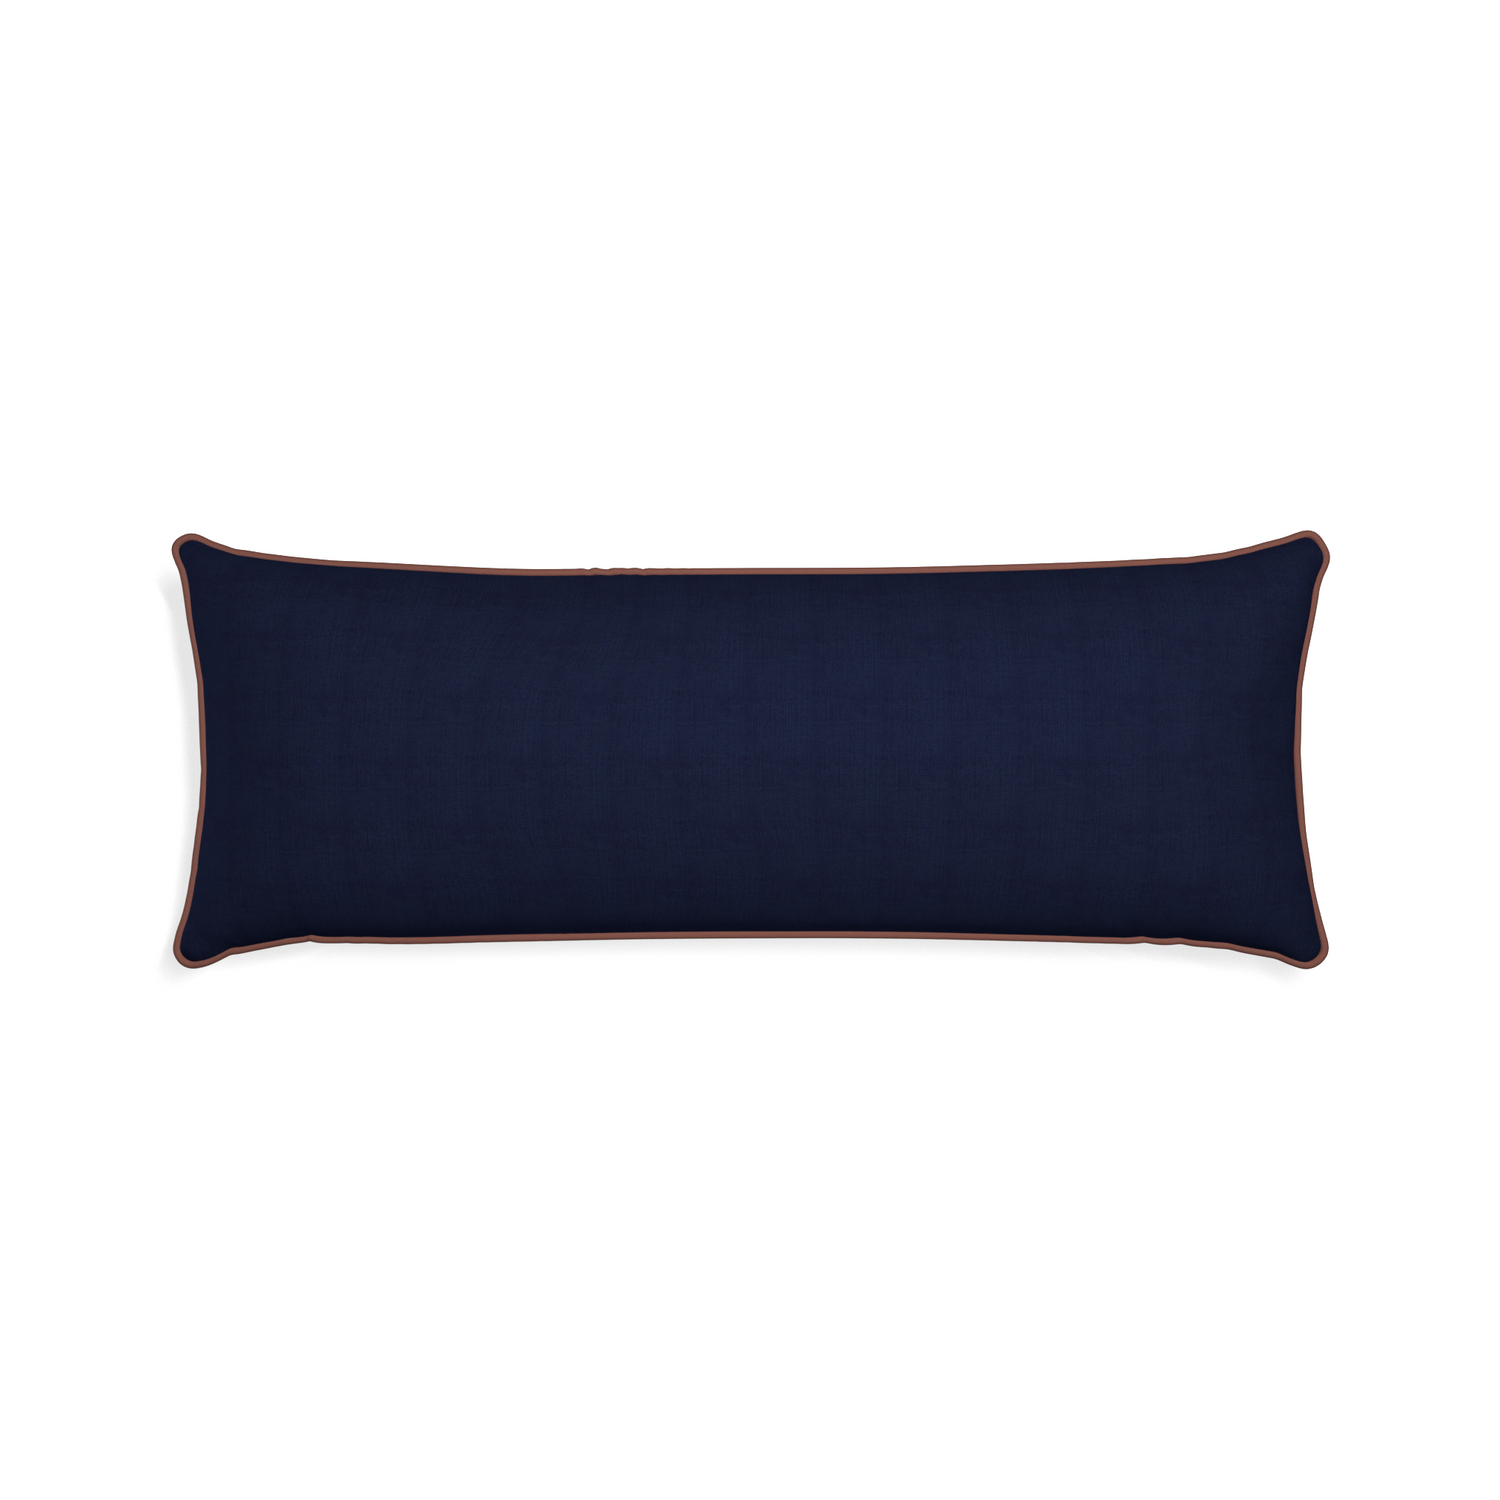 Xl-lumbar midnight custom navy bluepillow with w piping on white background